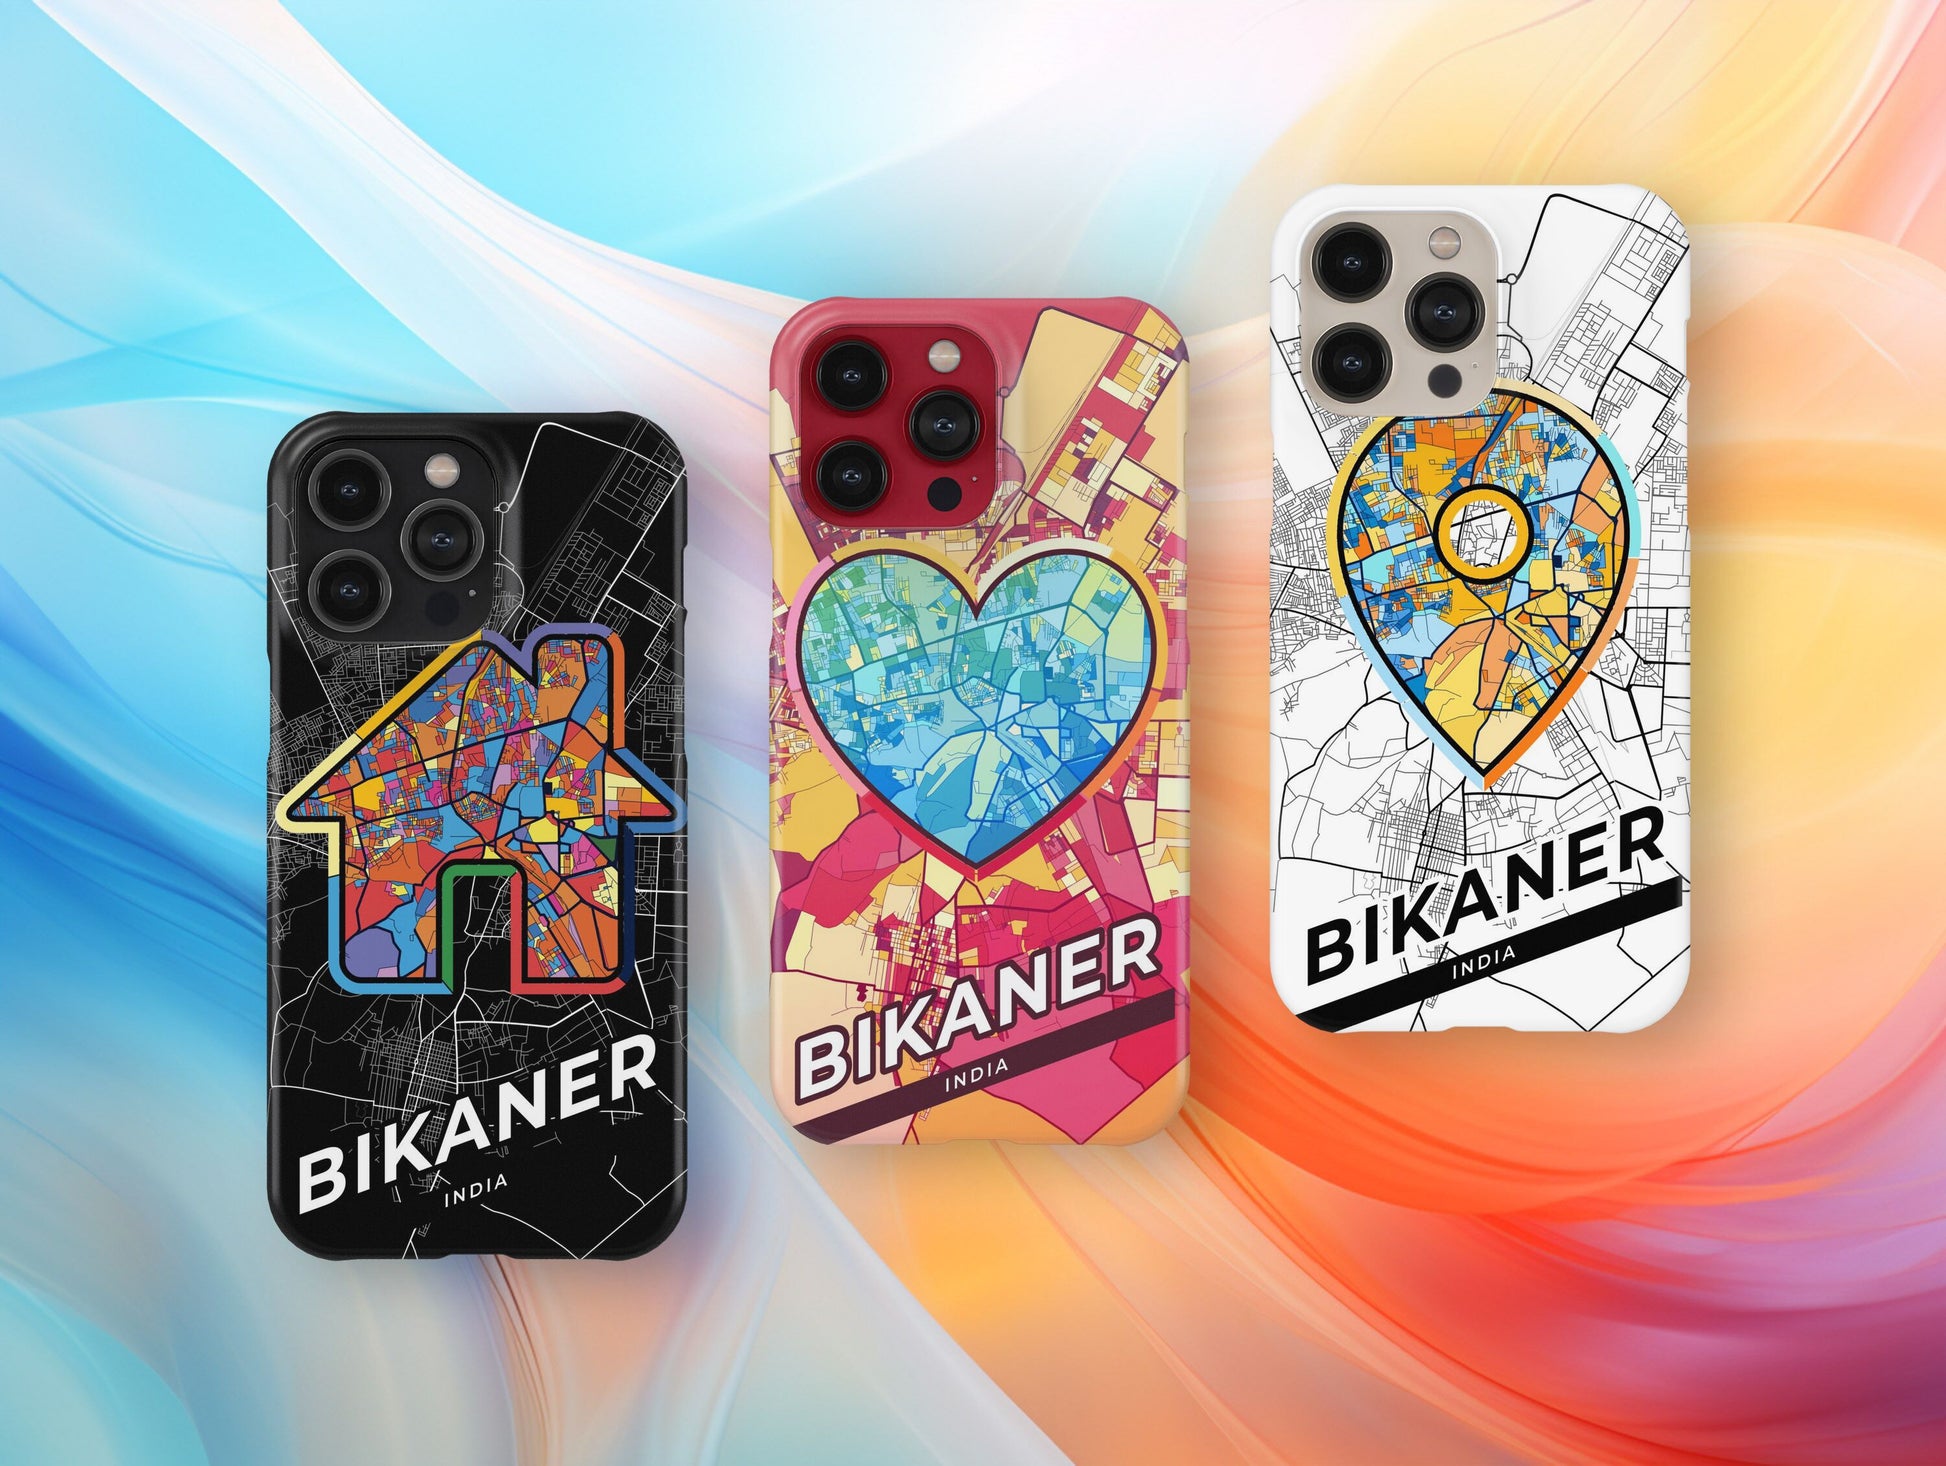 Bikaner India slim phone case with colorful icon. Birthday, wedding or housewarming gift. Couple match cases.